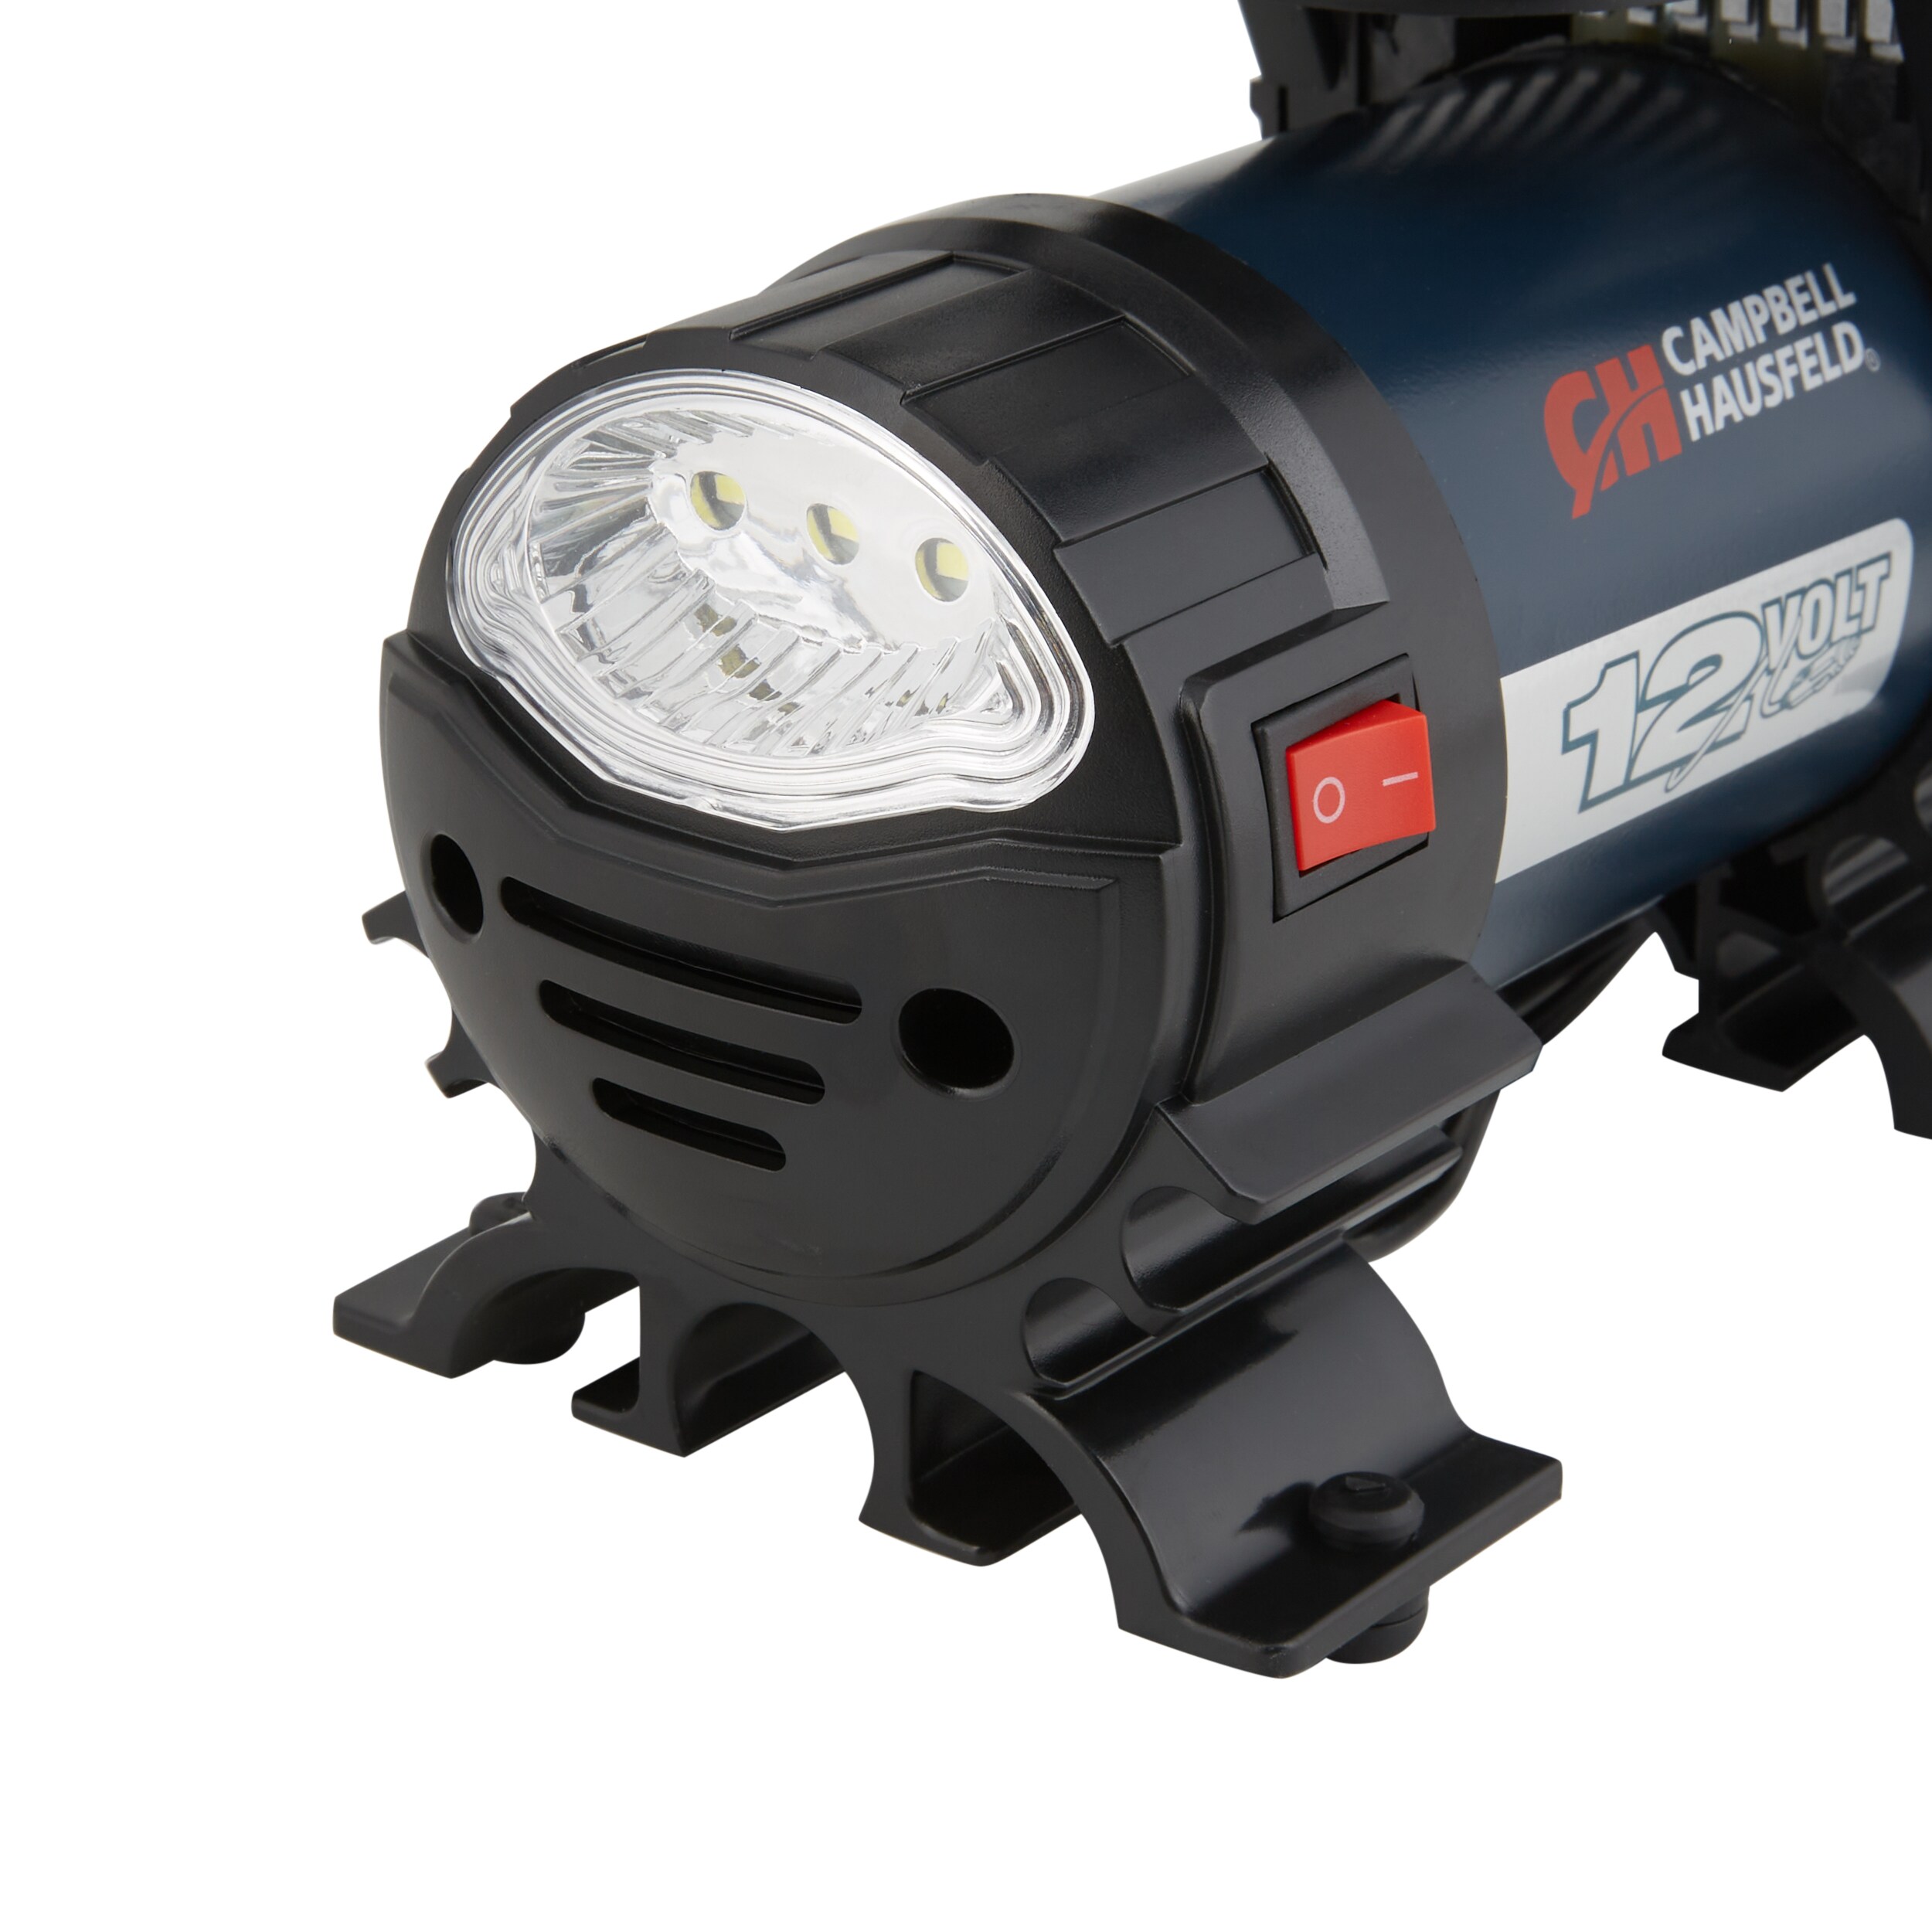 Campbell Hausfeld 12V Air Inflator (Power Source: Car/Electric) in